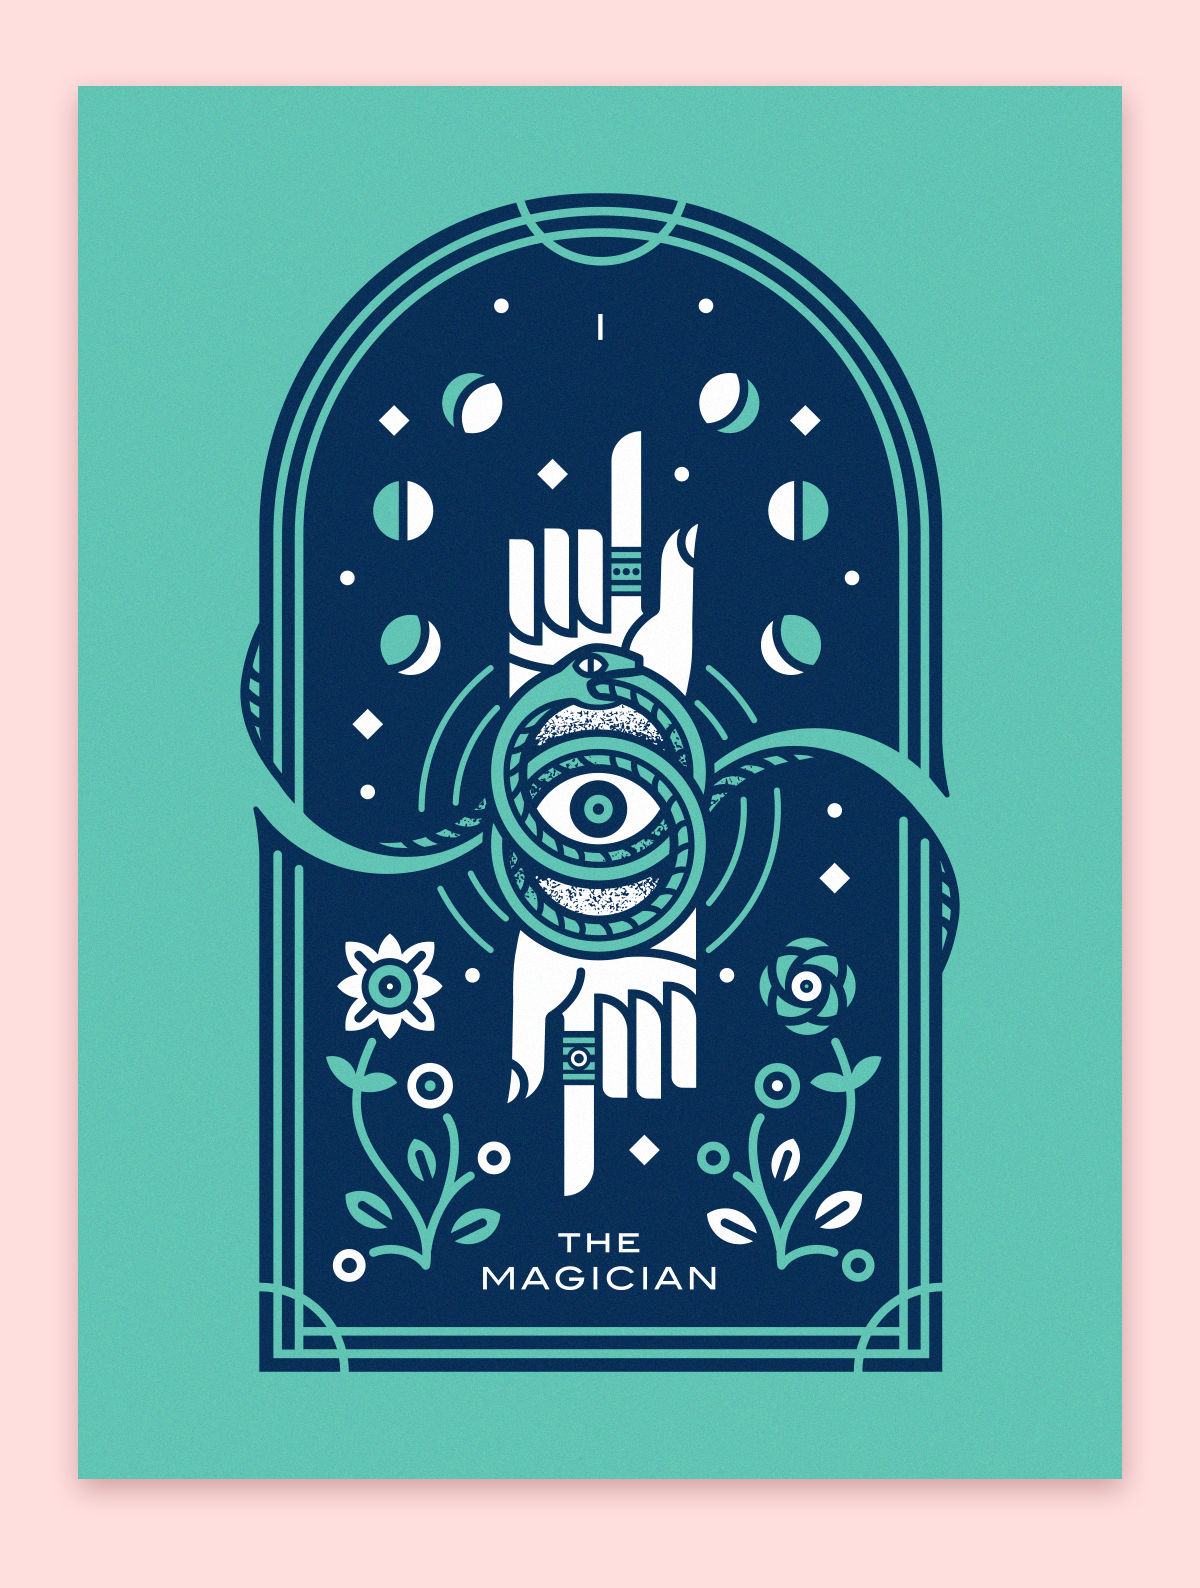 Dribbble - themagicianlarge.png by Allie Mounce